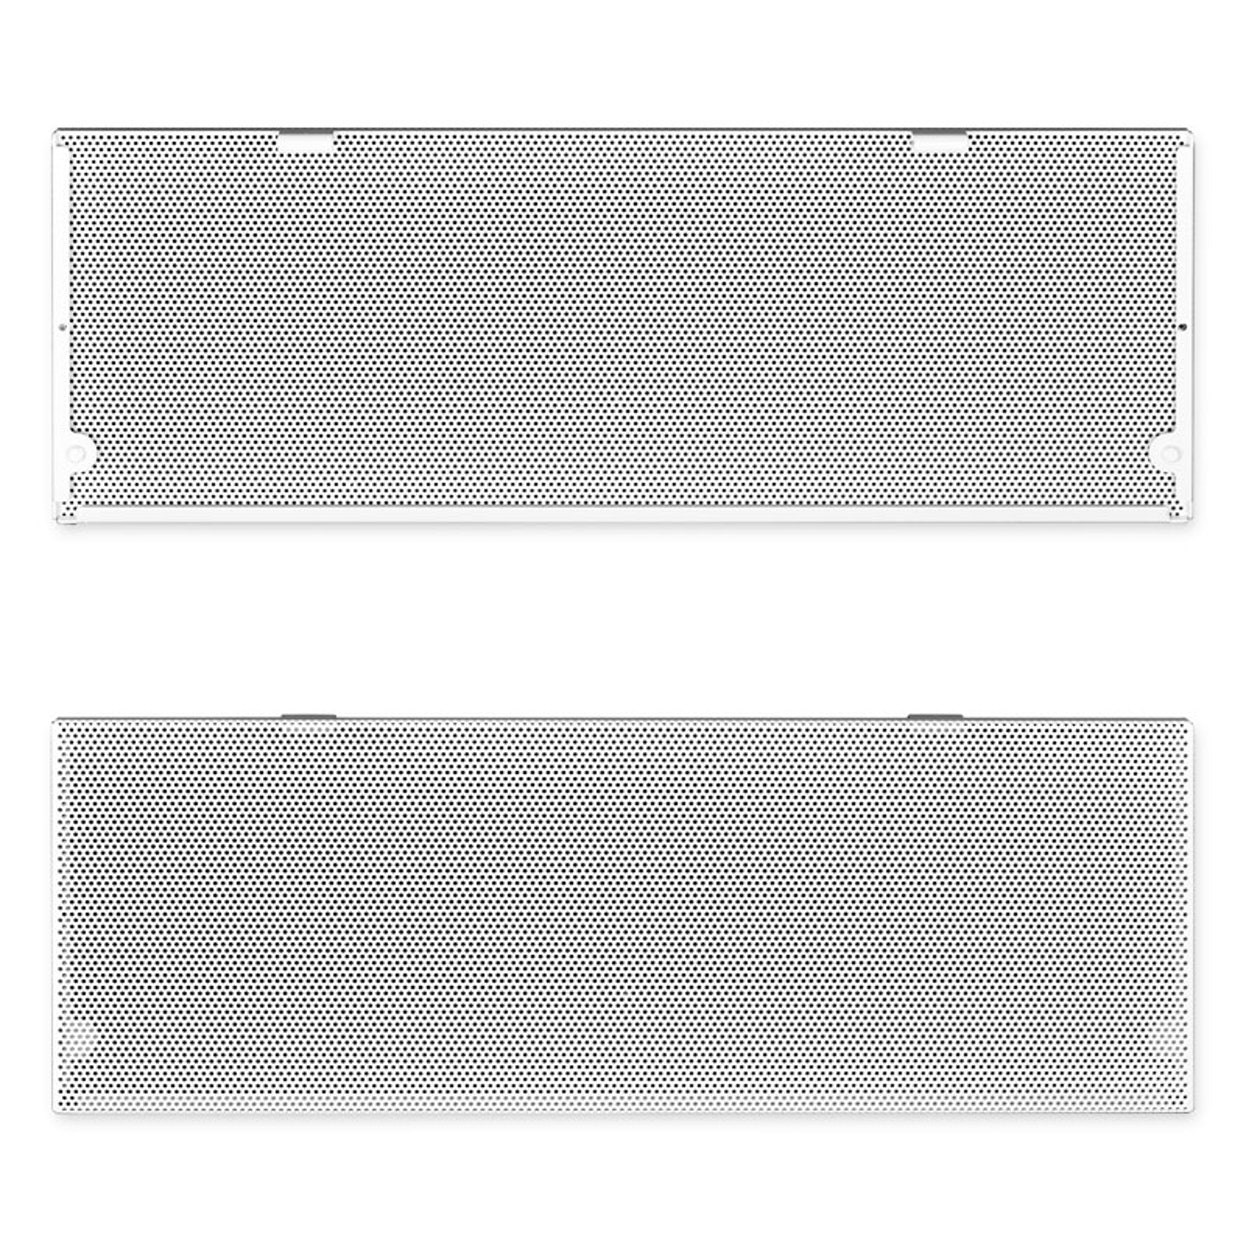 Photos - Other for Computer Lian Li Q58 Mesh Kit Side Panel for Q58 Case, White Q58-1W 